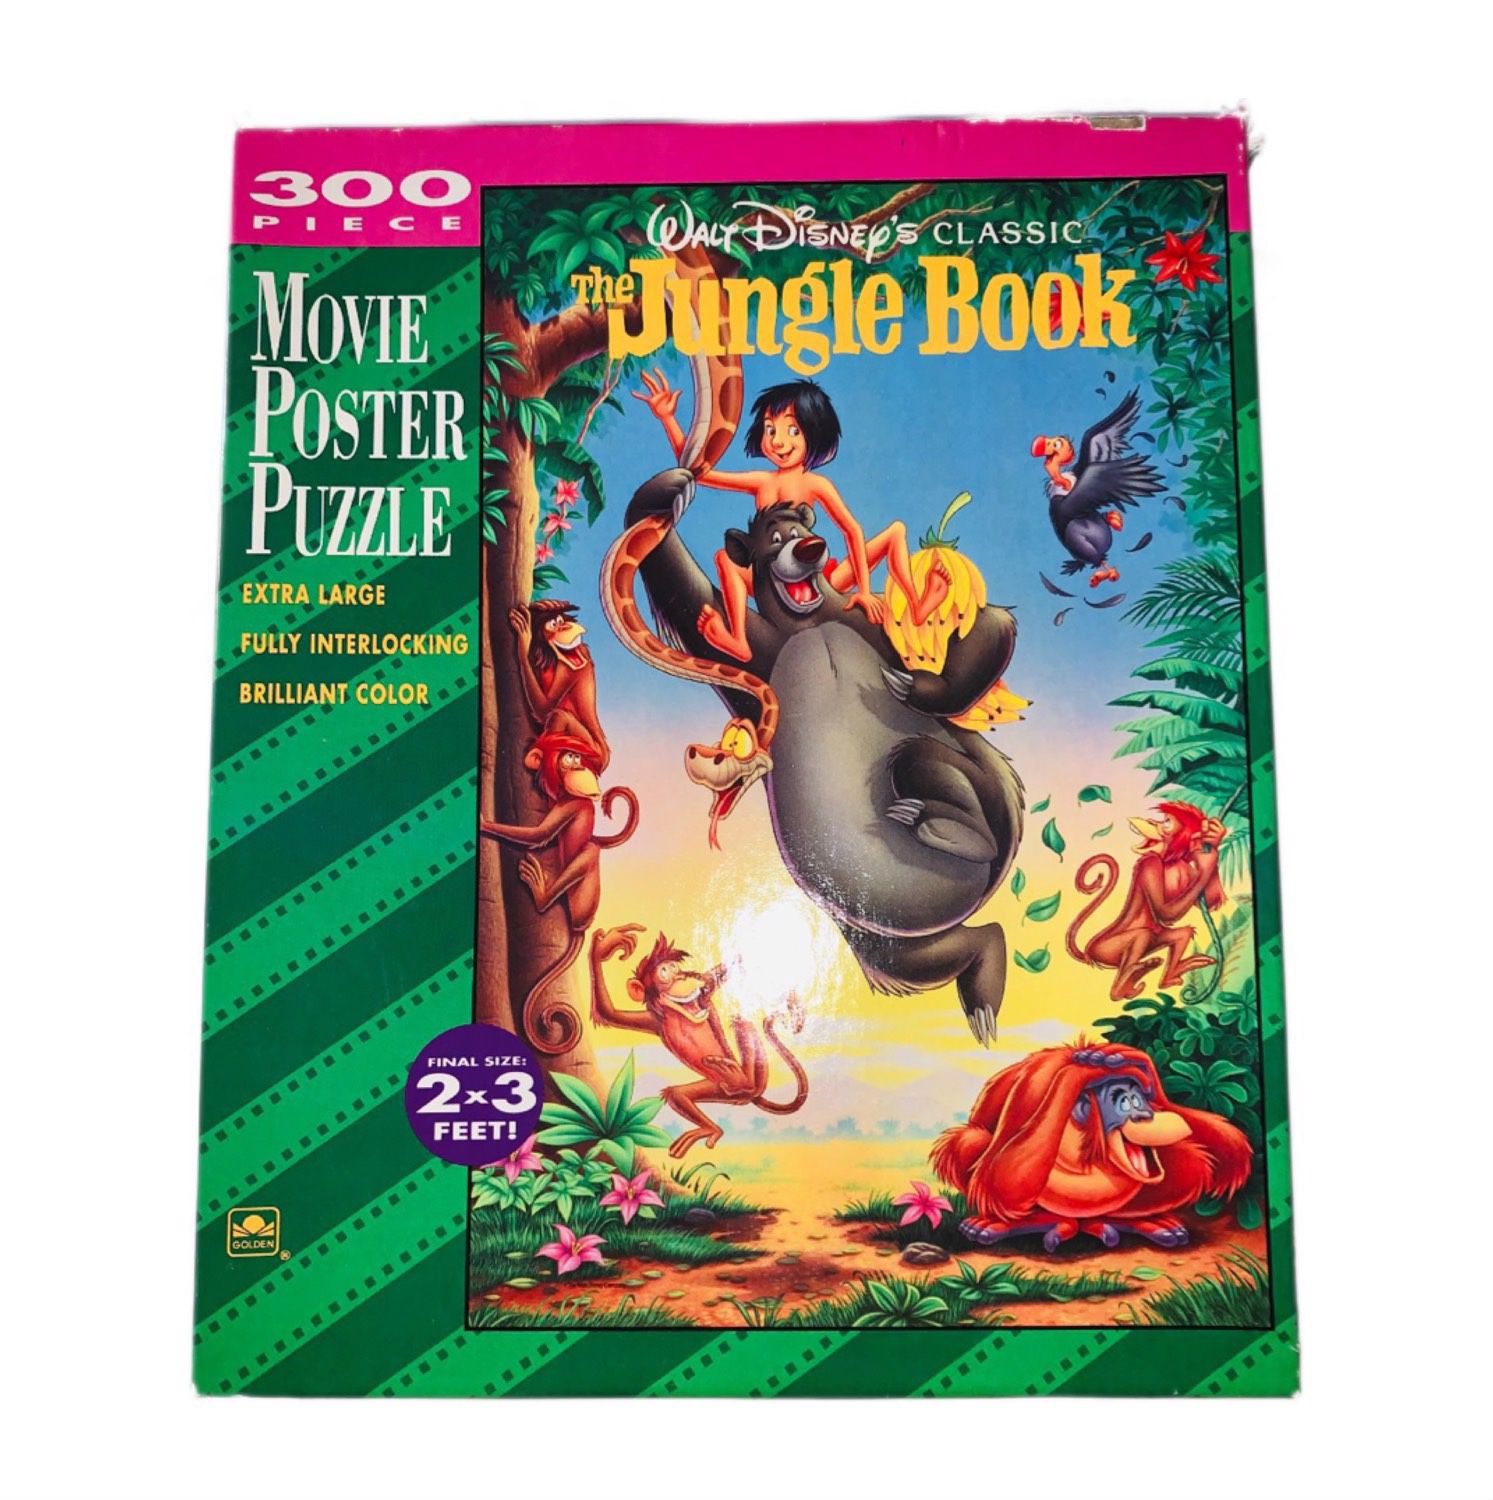 RARE Vintage 1990s Disney Jigsaw Puzzle Jungle Book Movie Poster 300 Pieces (Kids Toys, Games, Family, Collectible, VTG)